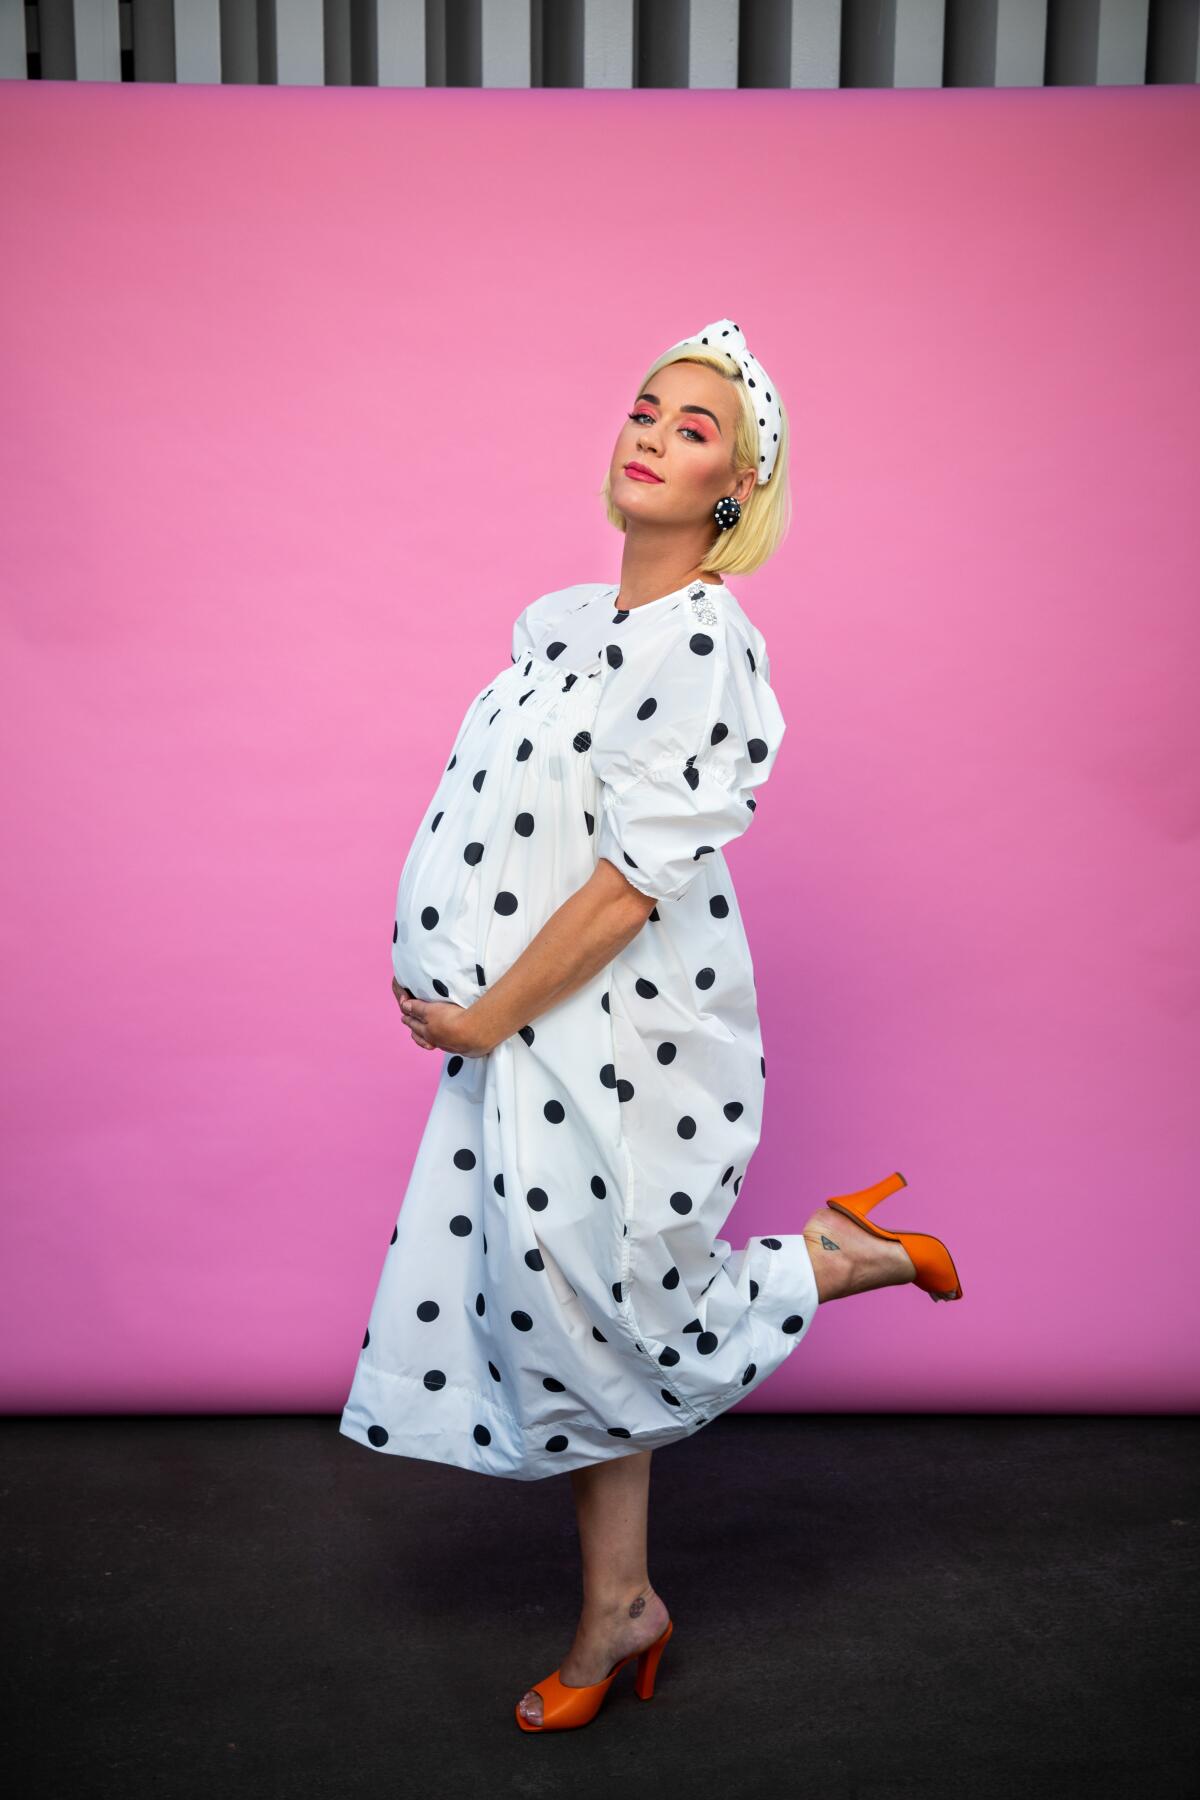 Katy Perry: “I was kind of born into chaos. So I thrive in it.”